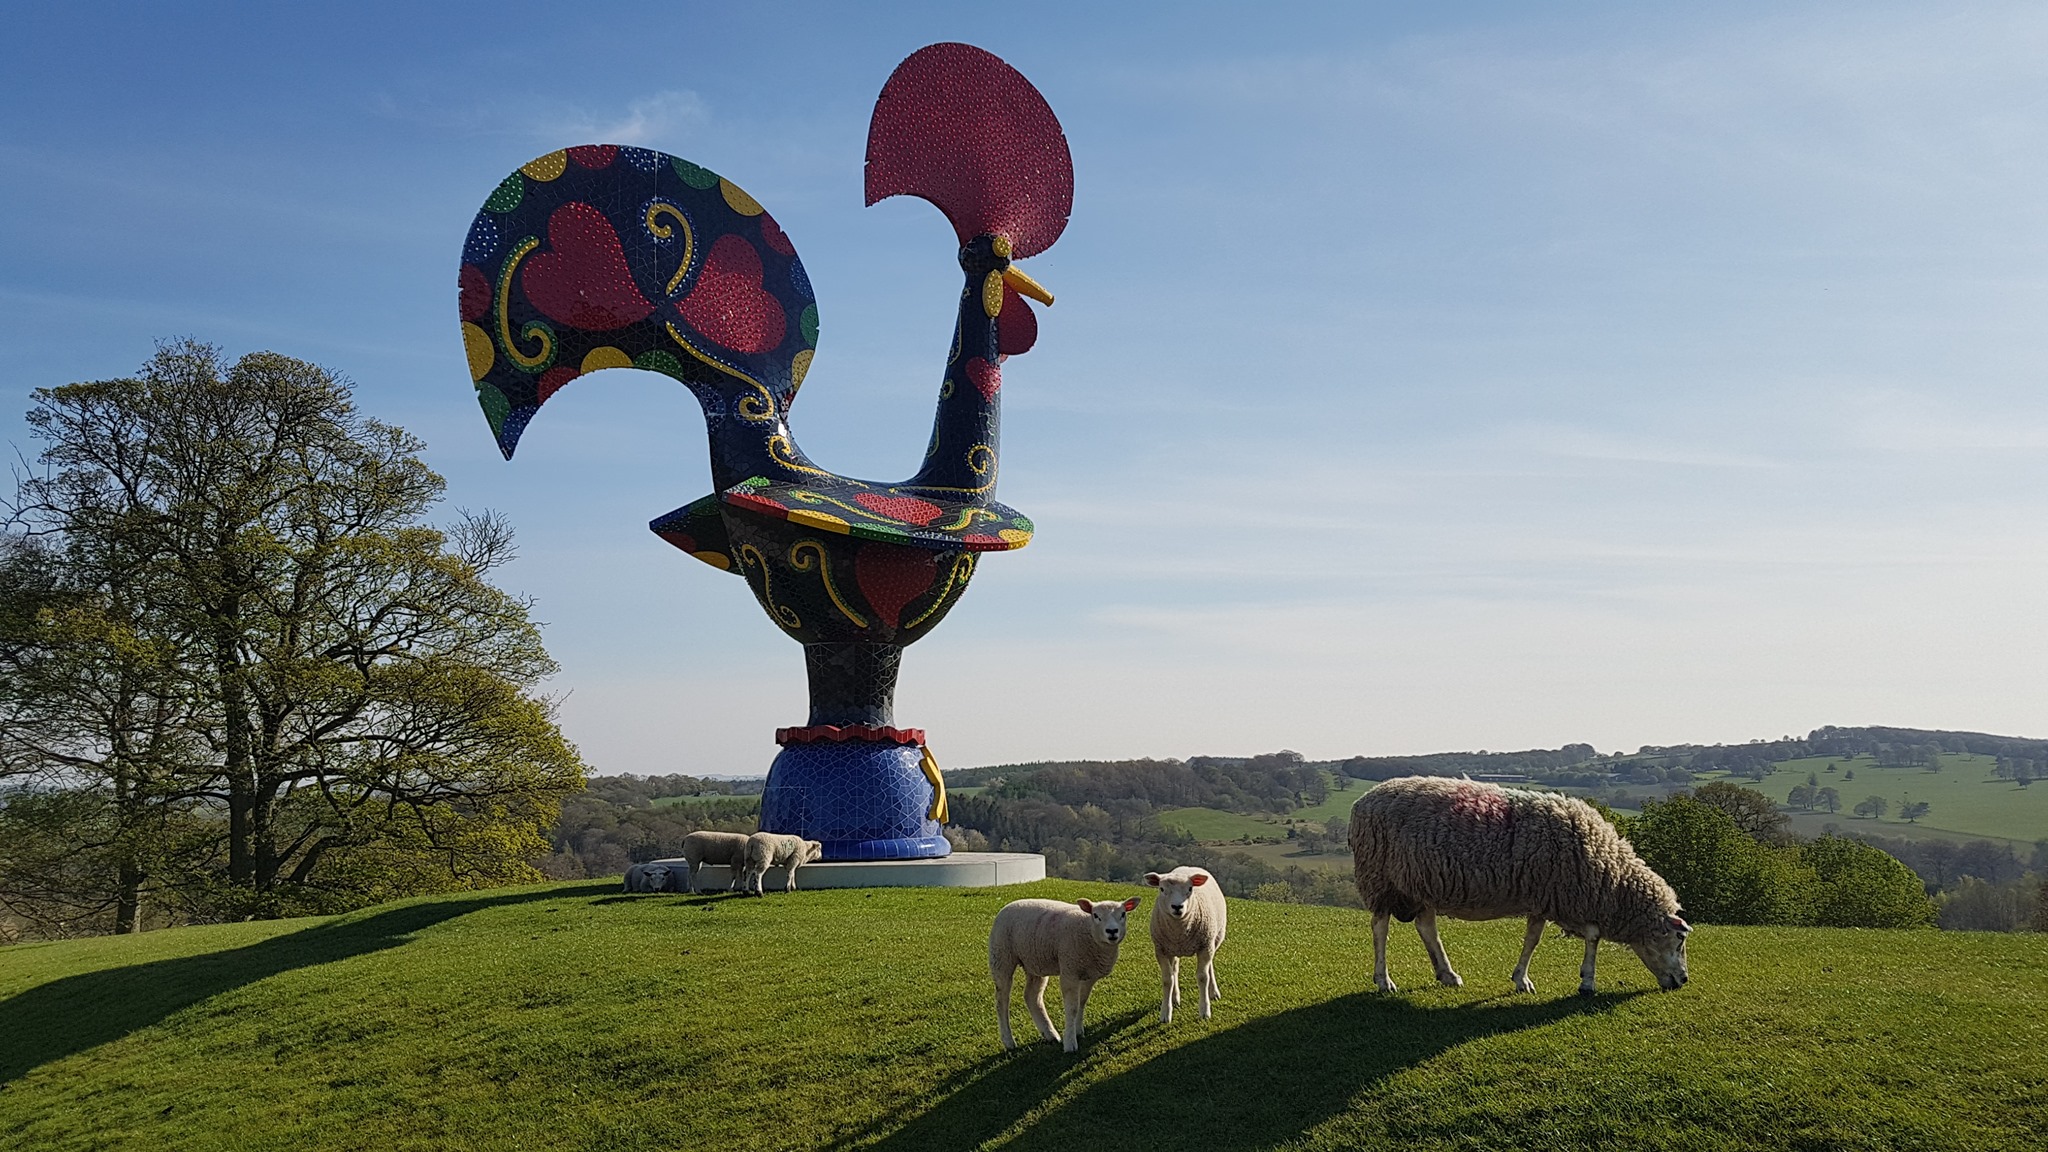 Yorkshire Sculpture Park, One Of Yorkshire’s Most Popular Attractions, Will Not Be Opening July 4th